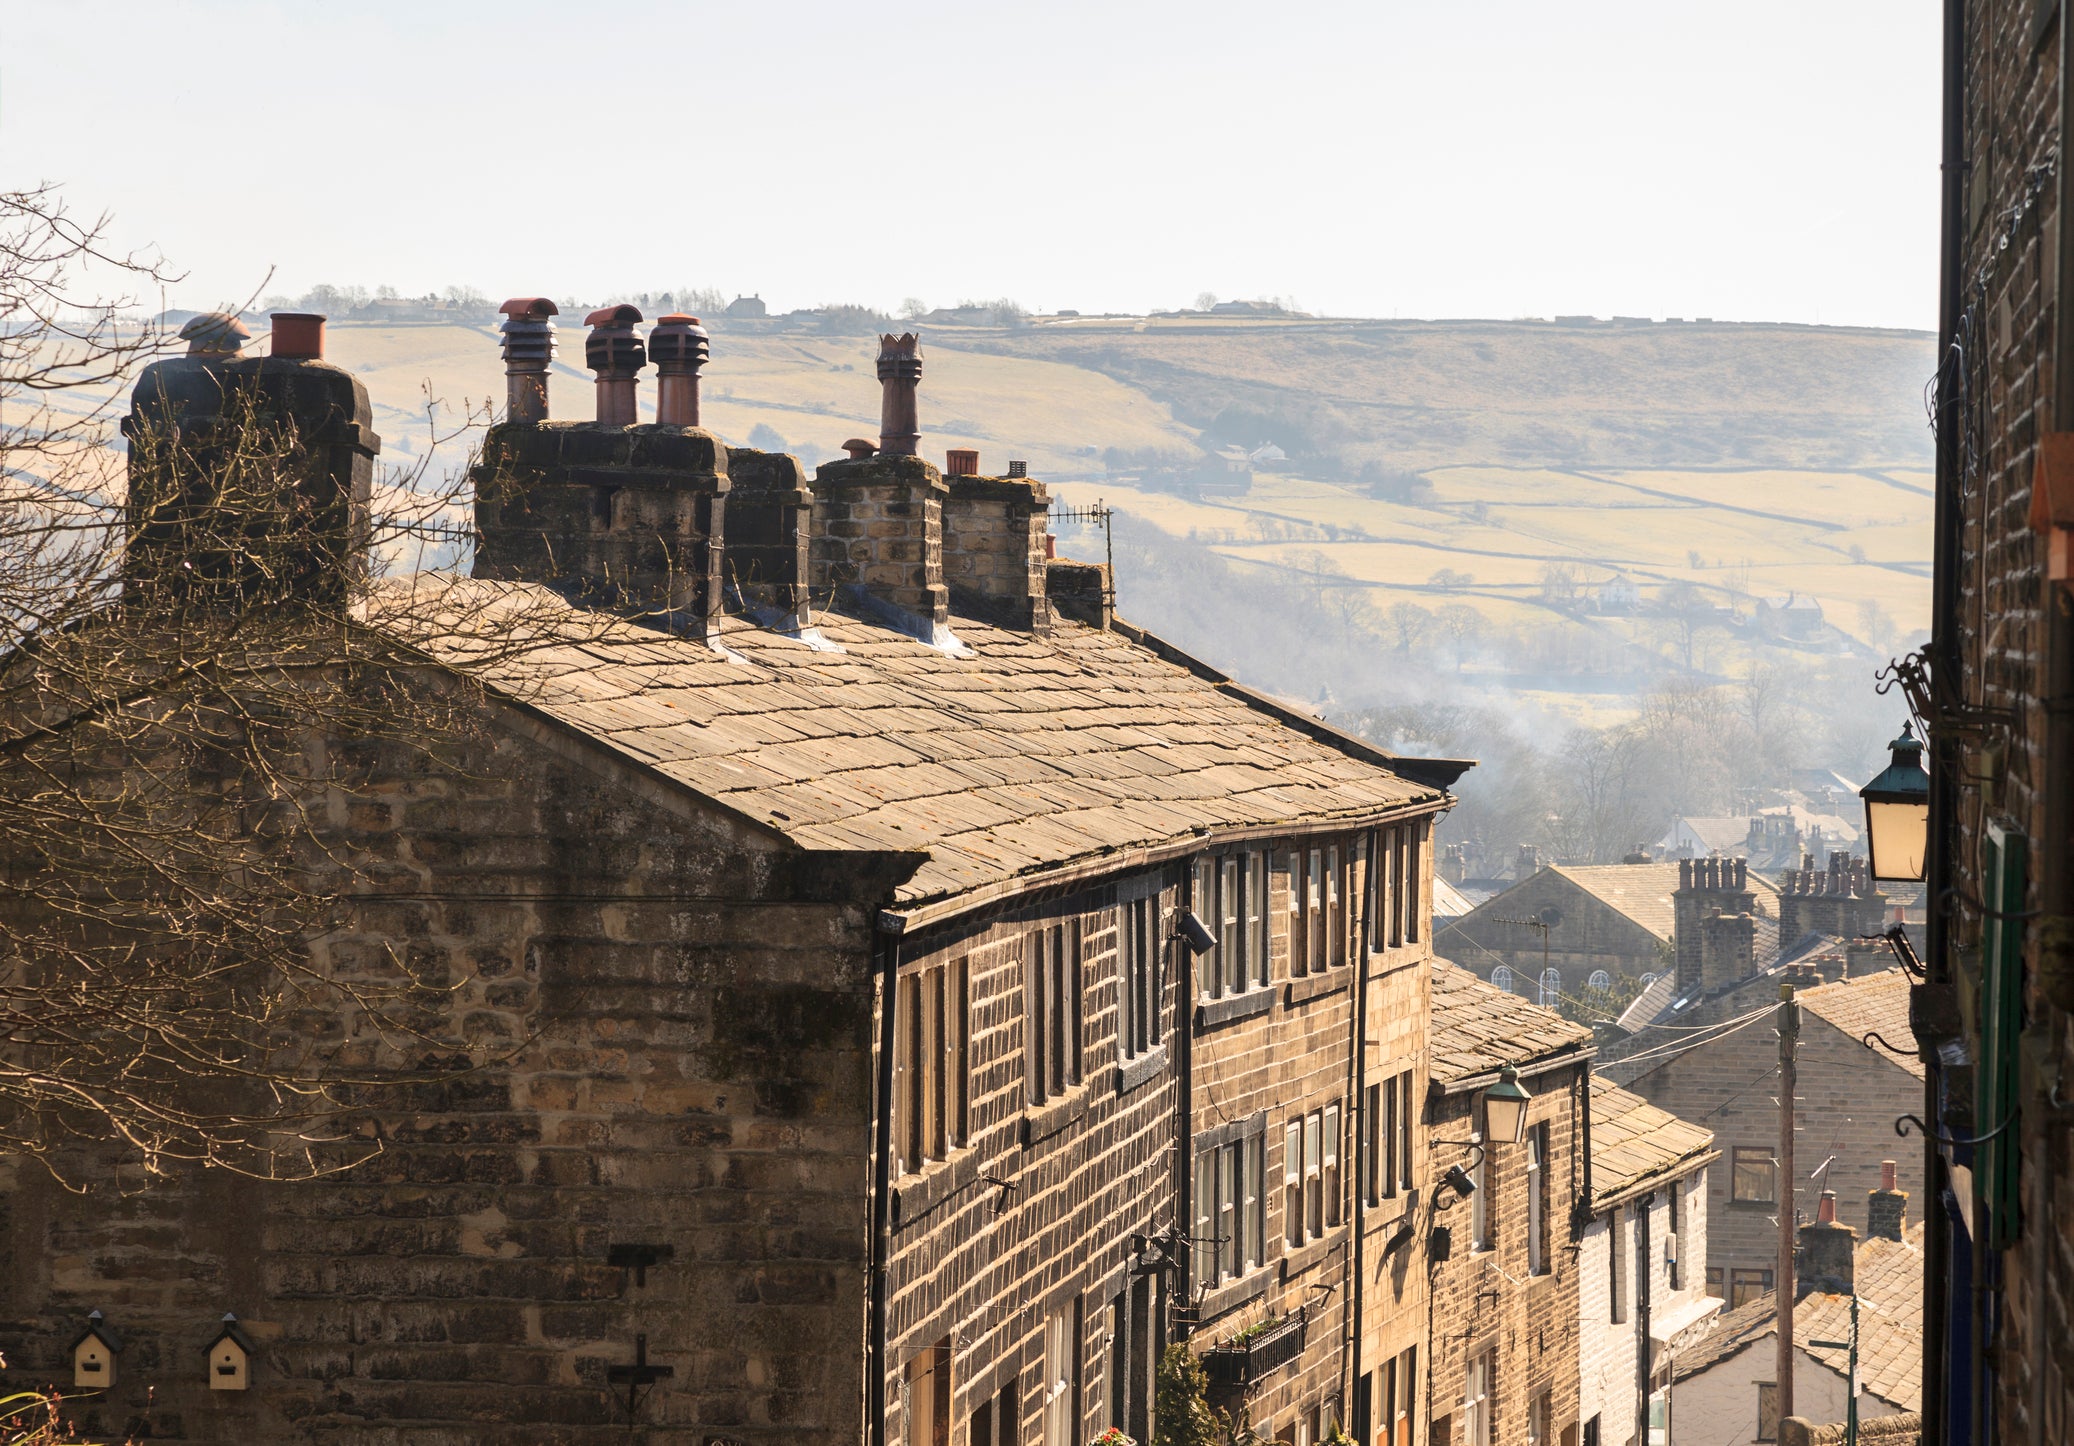 Get inspired to write your own bestseller in Haworth